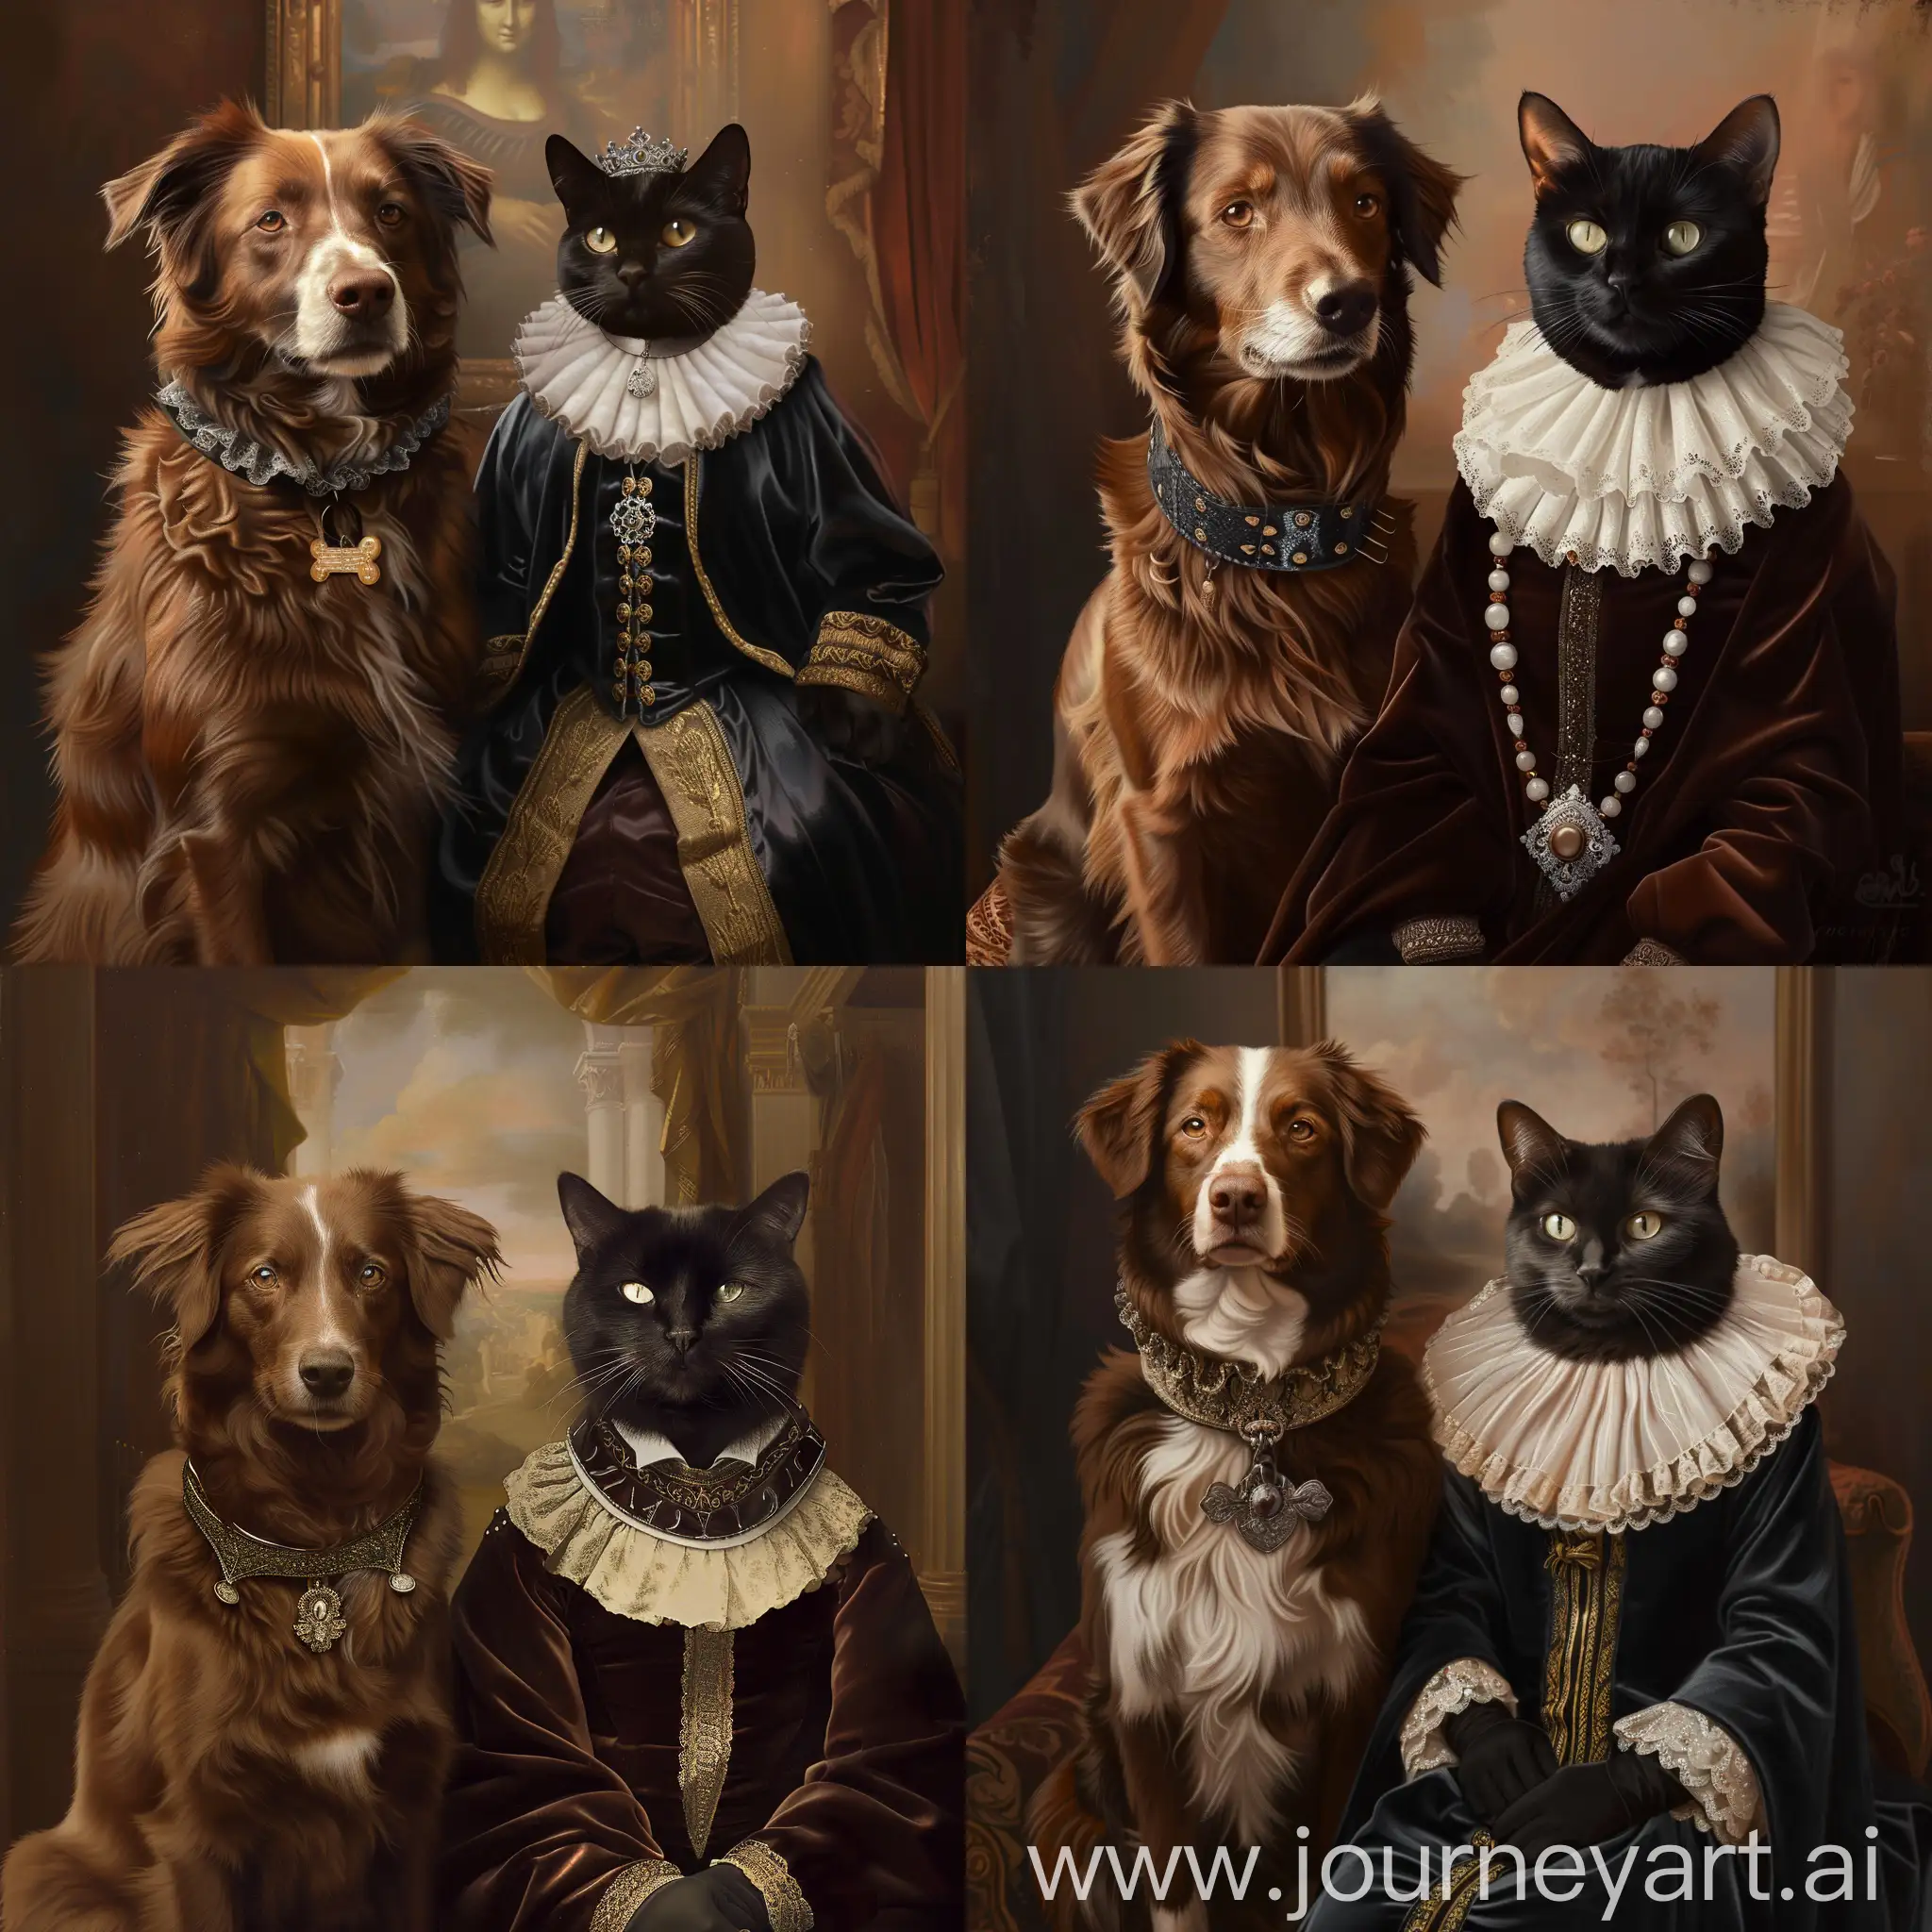 Create an image featuring a brown Border Collie and a black tuxedo cat seated side by side, both wearing regal clothing. The Border Collie should be on the left side of the image, and the cat on the right. They should appear dignified and regal. The background should resemble the setting of Leonardo da Vinci's Mona Lisa painting, with muted colors and an enigmatic atmosphere. The animals should be depicted in a style reminiscent of Leonardo's iconic portrait style, with attention to detail and realism. The clothing should reflect a royal or noble theme, such as velvet robes or ornate collars, fitting for a portrait session. The overall mood should be serene and timeless, capturing the essence of classical portraiture.